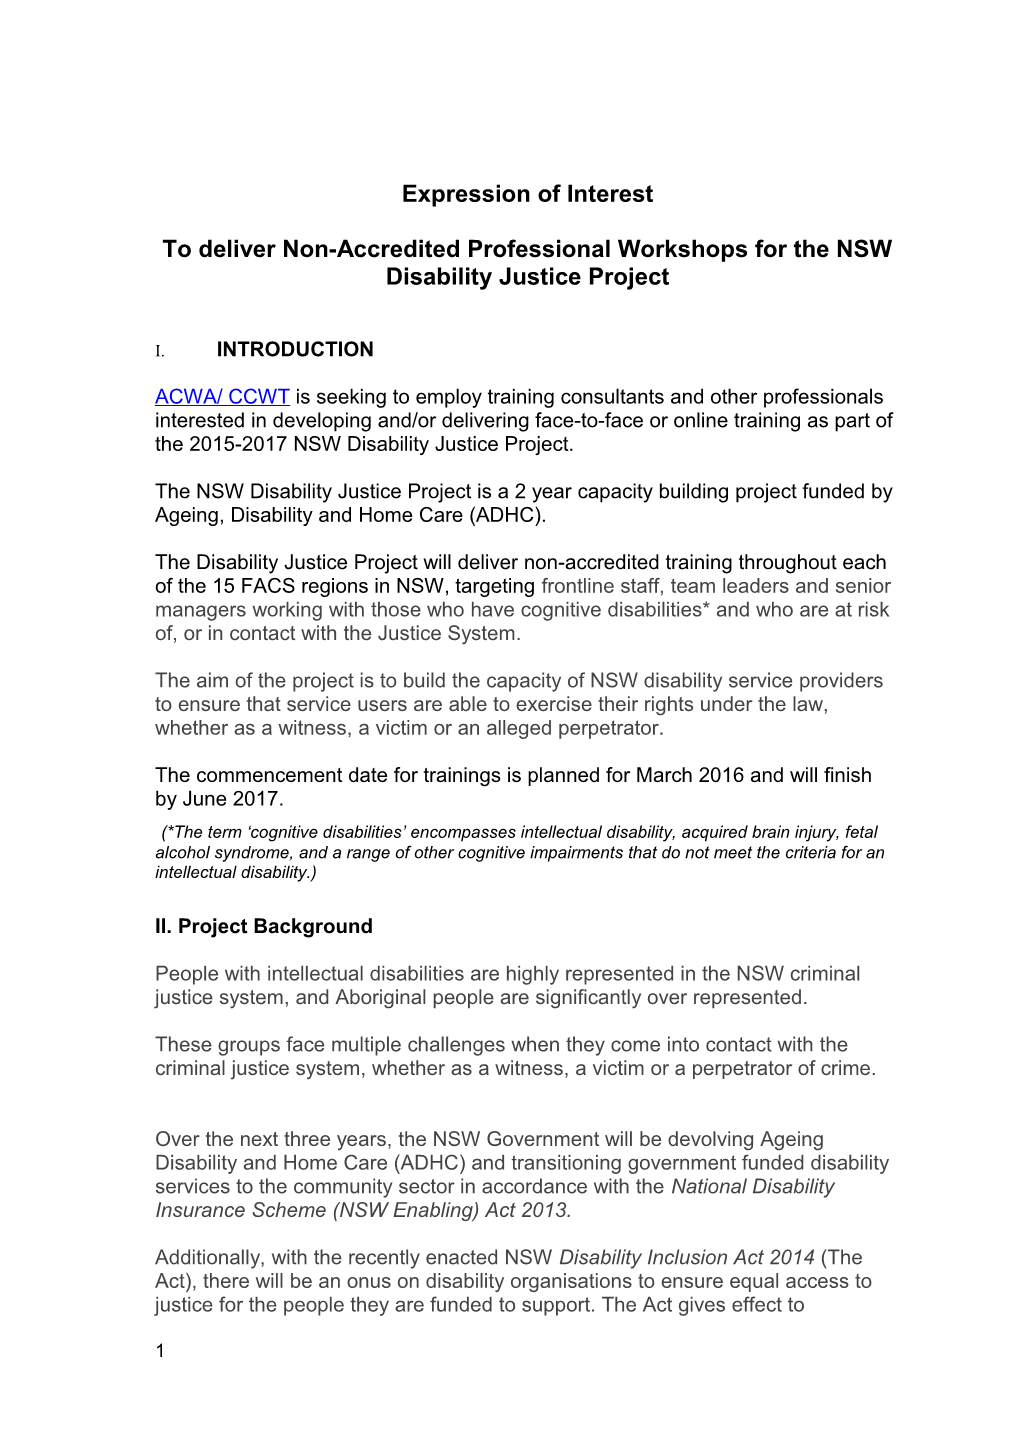 To Deliver Non-Accredited Professional Workshops for the NSW Disability Justice Project